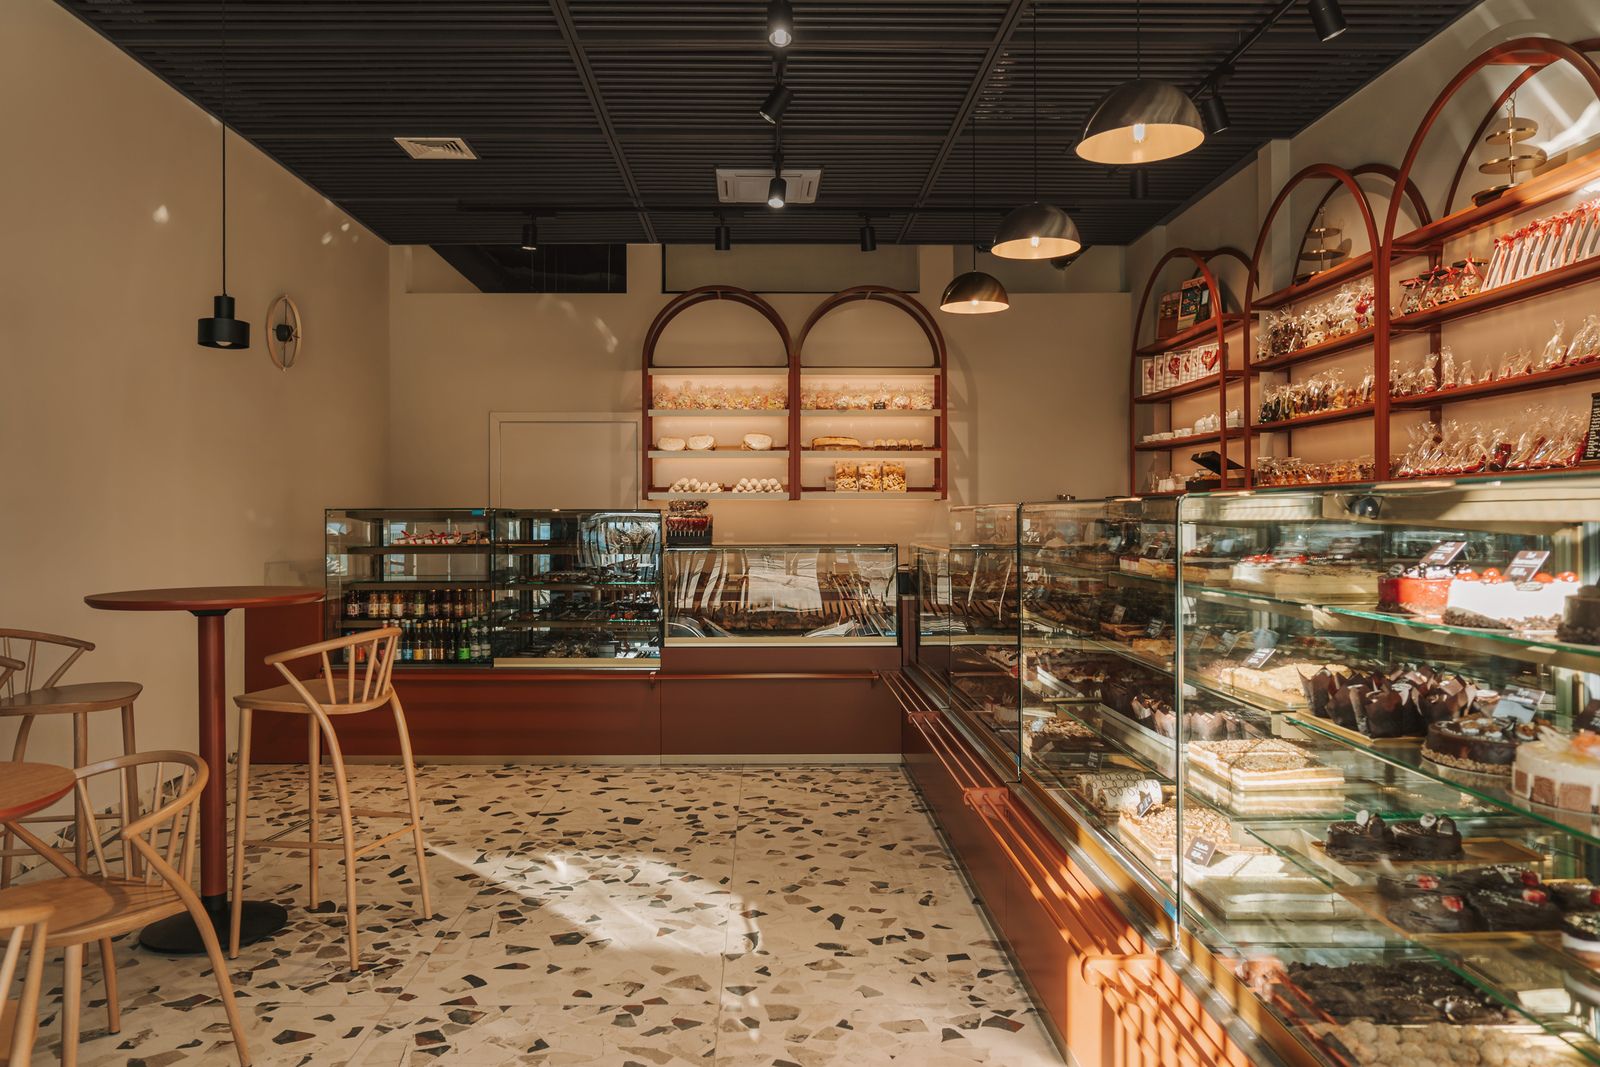 A chocolate-like pattern adorns the floor tiles of this cozy Polish patisserie